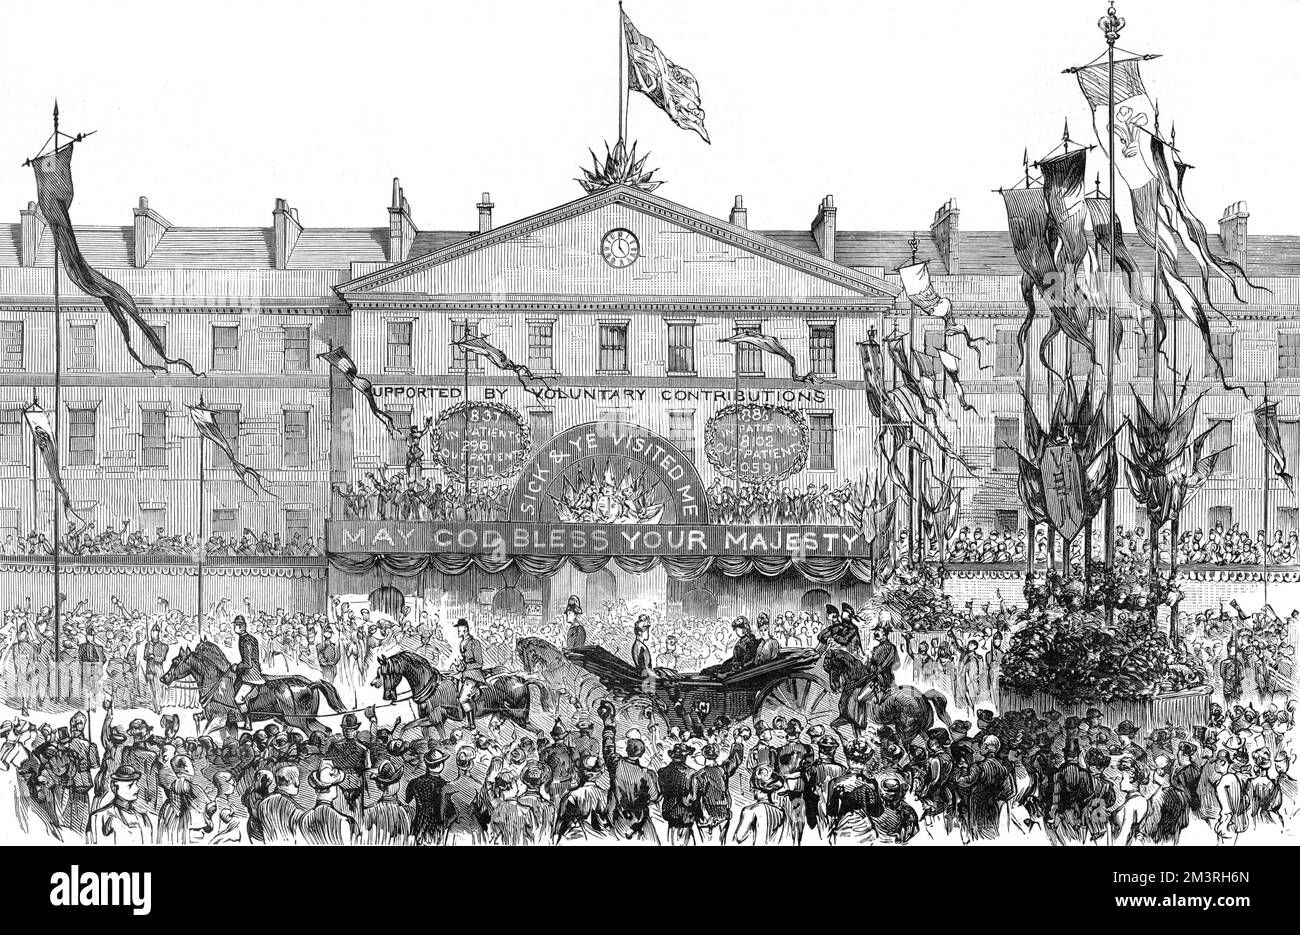 Crowds cheering Queen Victoria as she drives in a carriage through Whitechapel during one of her Golden Jubilee progresses.  The royal party passes in front of the London Hospital which is bedecked with flags and slogans including 'Sick and Ye Visited Me' as well as, 'God Bless Your Majesty.'     Date: 1887 Stock Photo